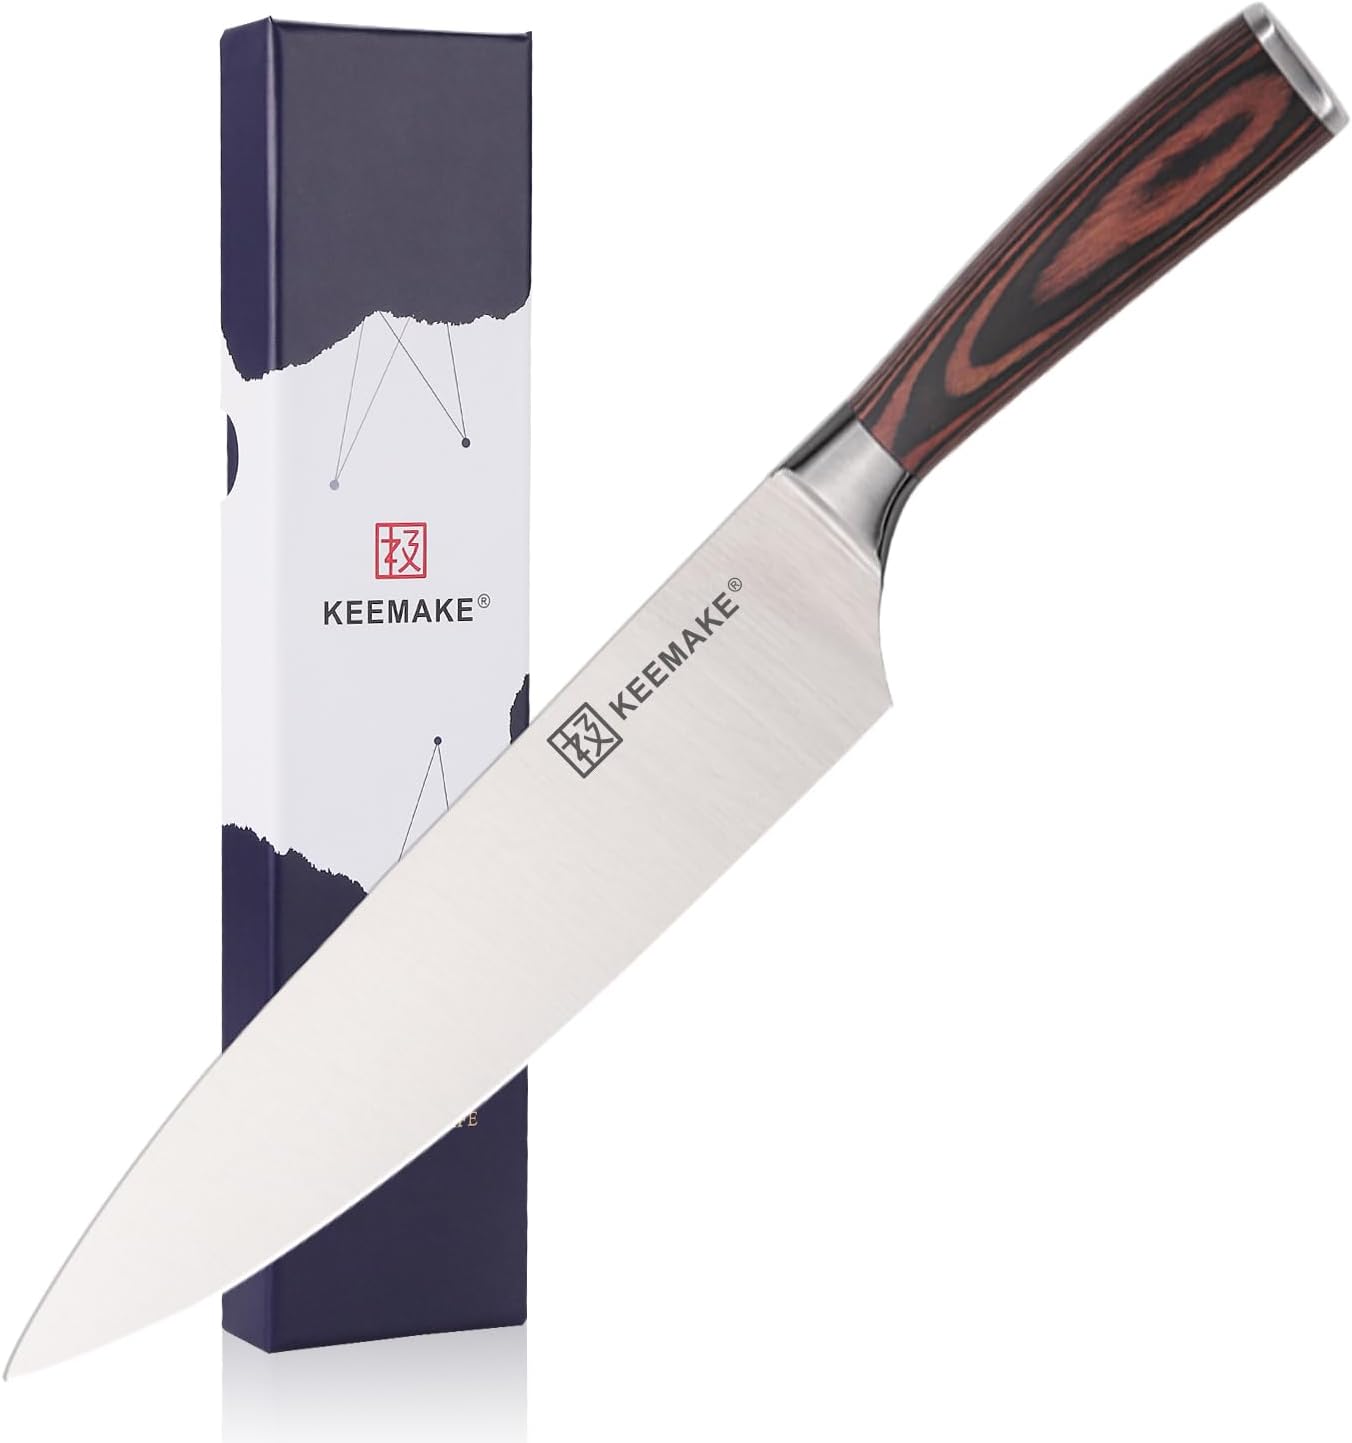 KEEMAKE Chef Knife 8 inch, Japanese Kitchen Knife with German High Carbon Stainless Steel 1.4116 Meat Knife